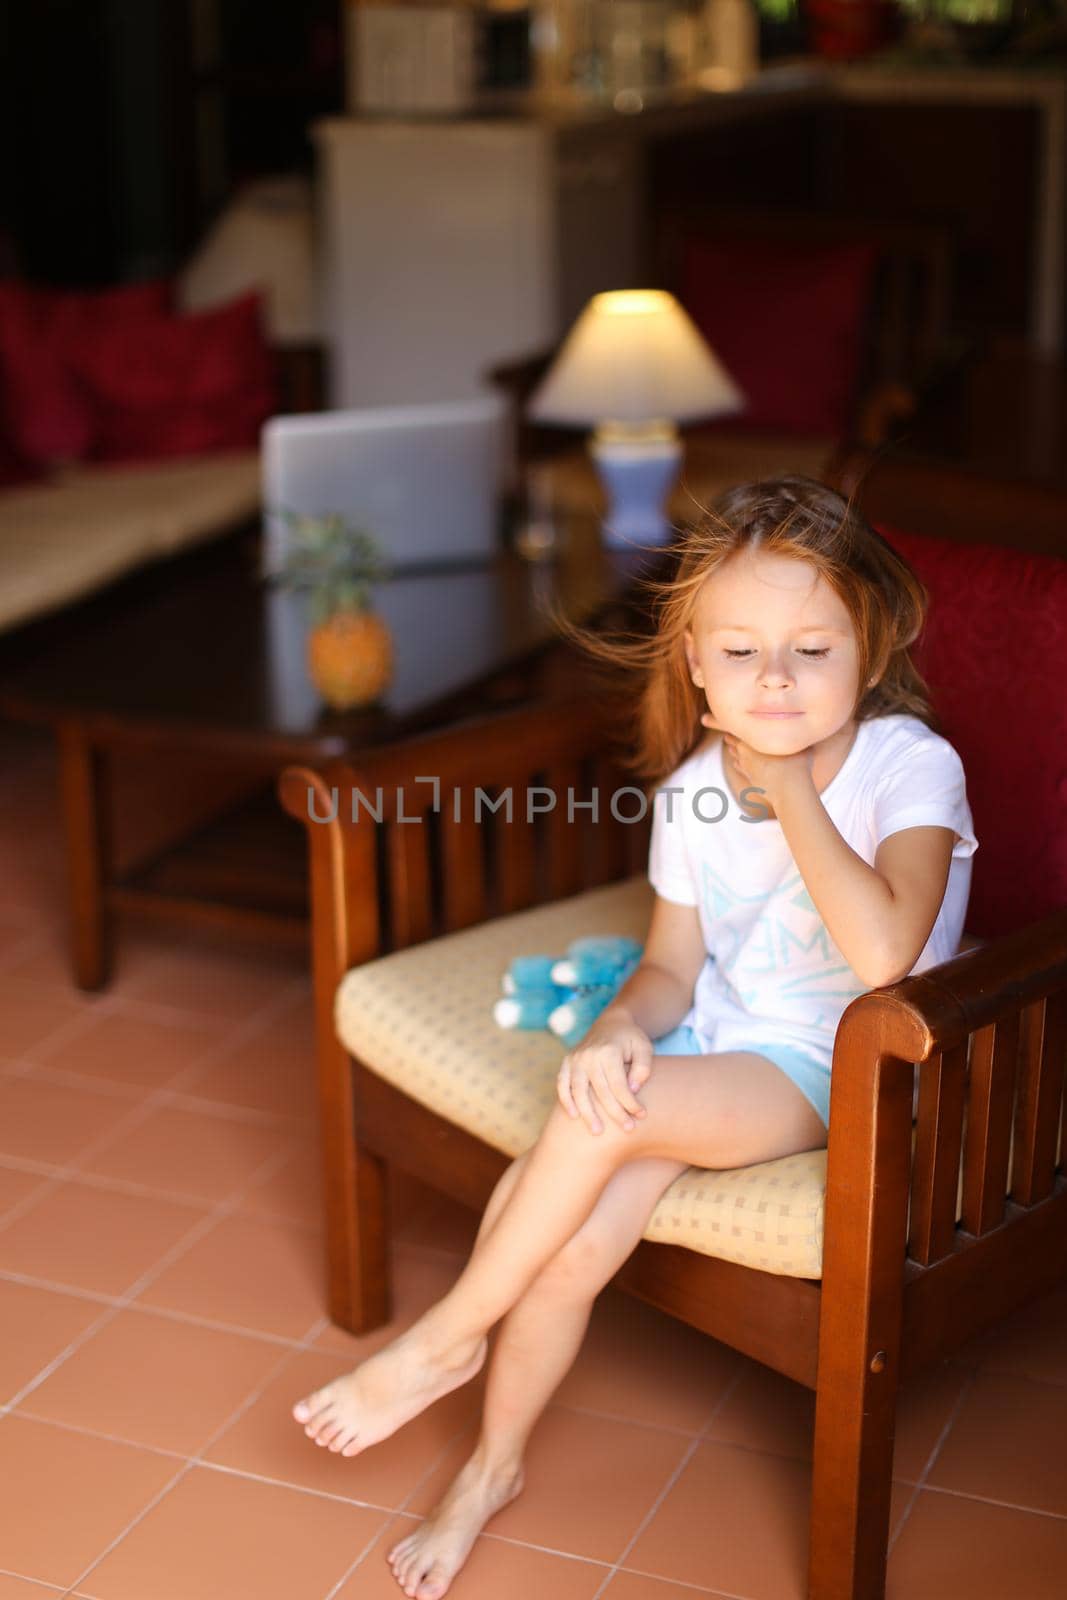 Little european female kid sitting with toy in wooden chair. Concept of kid model and wood in interior.